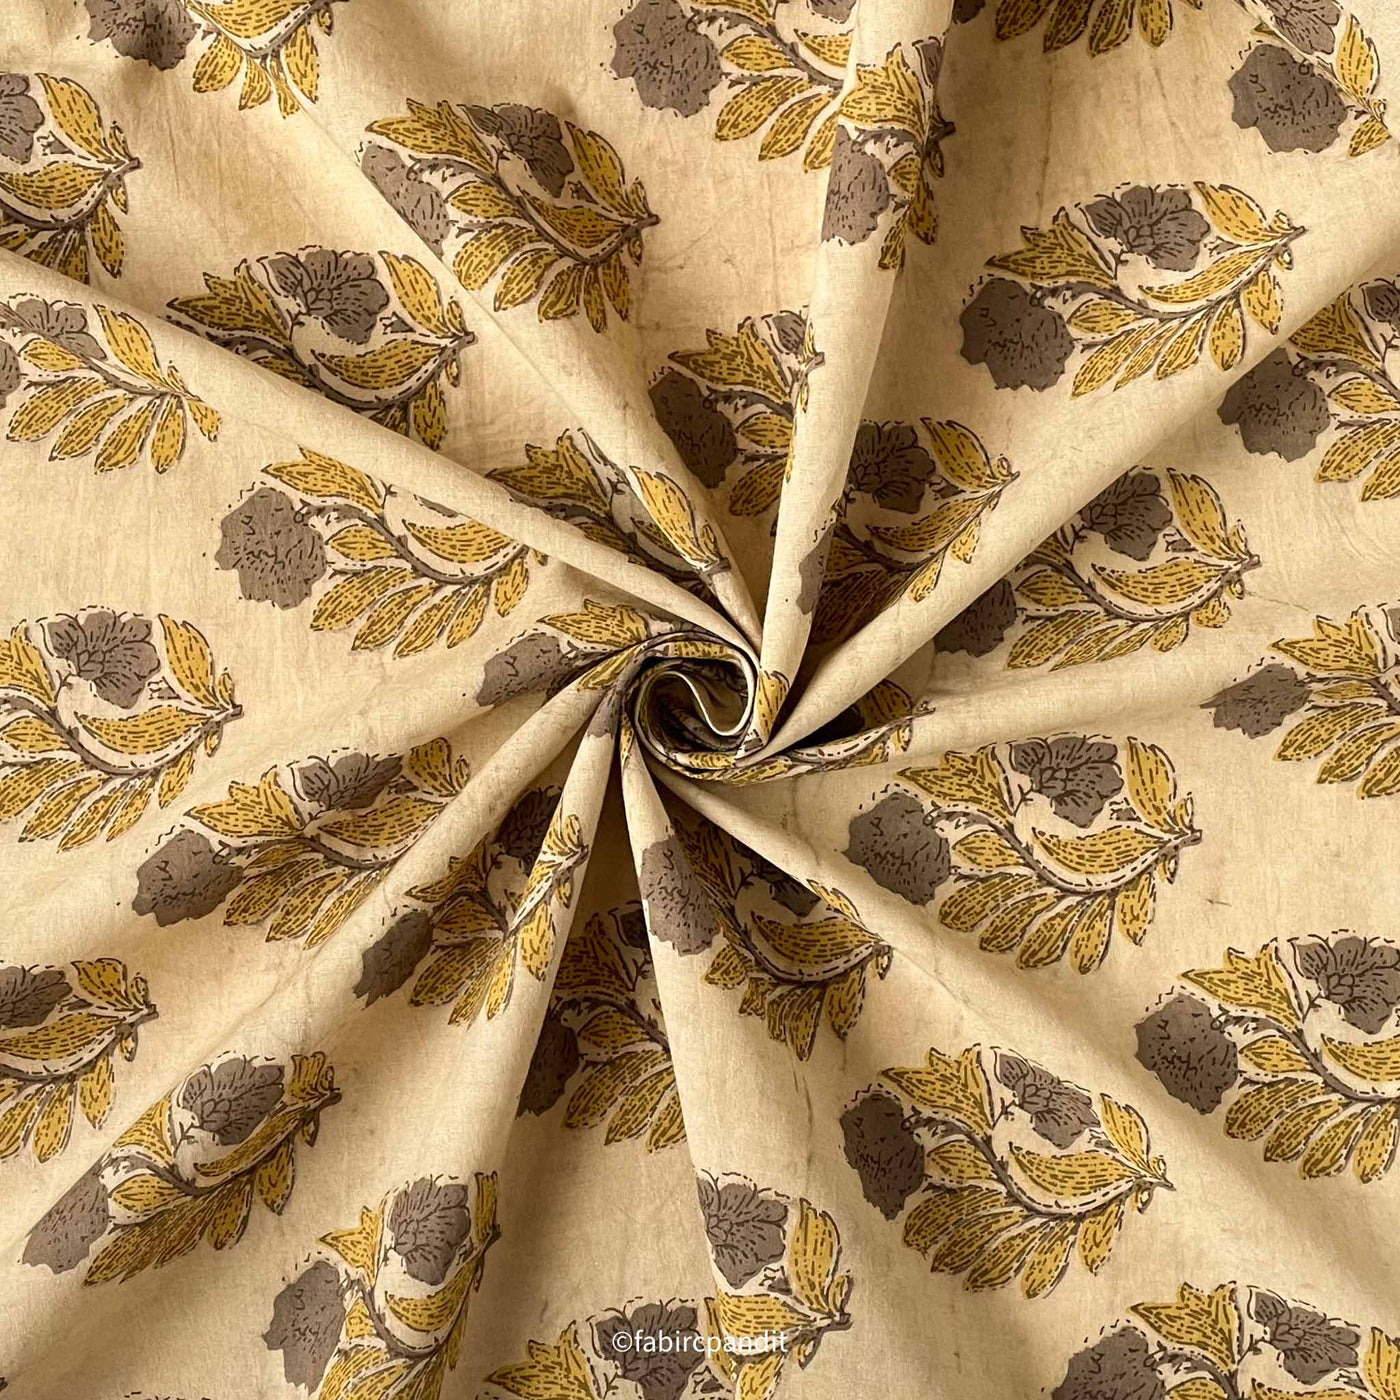 Fabric Pandit Fabric Ocher and Brown Flower Bunch Hand Block Printed Pure Cotton Fabirc (Width 43 inches)